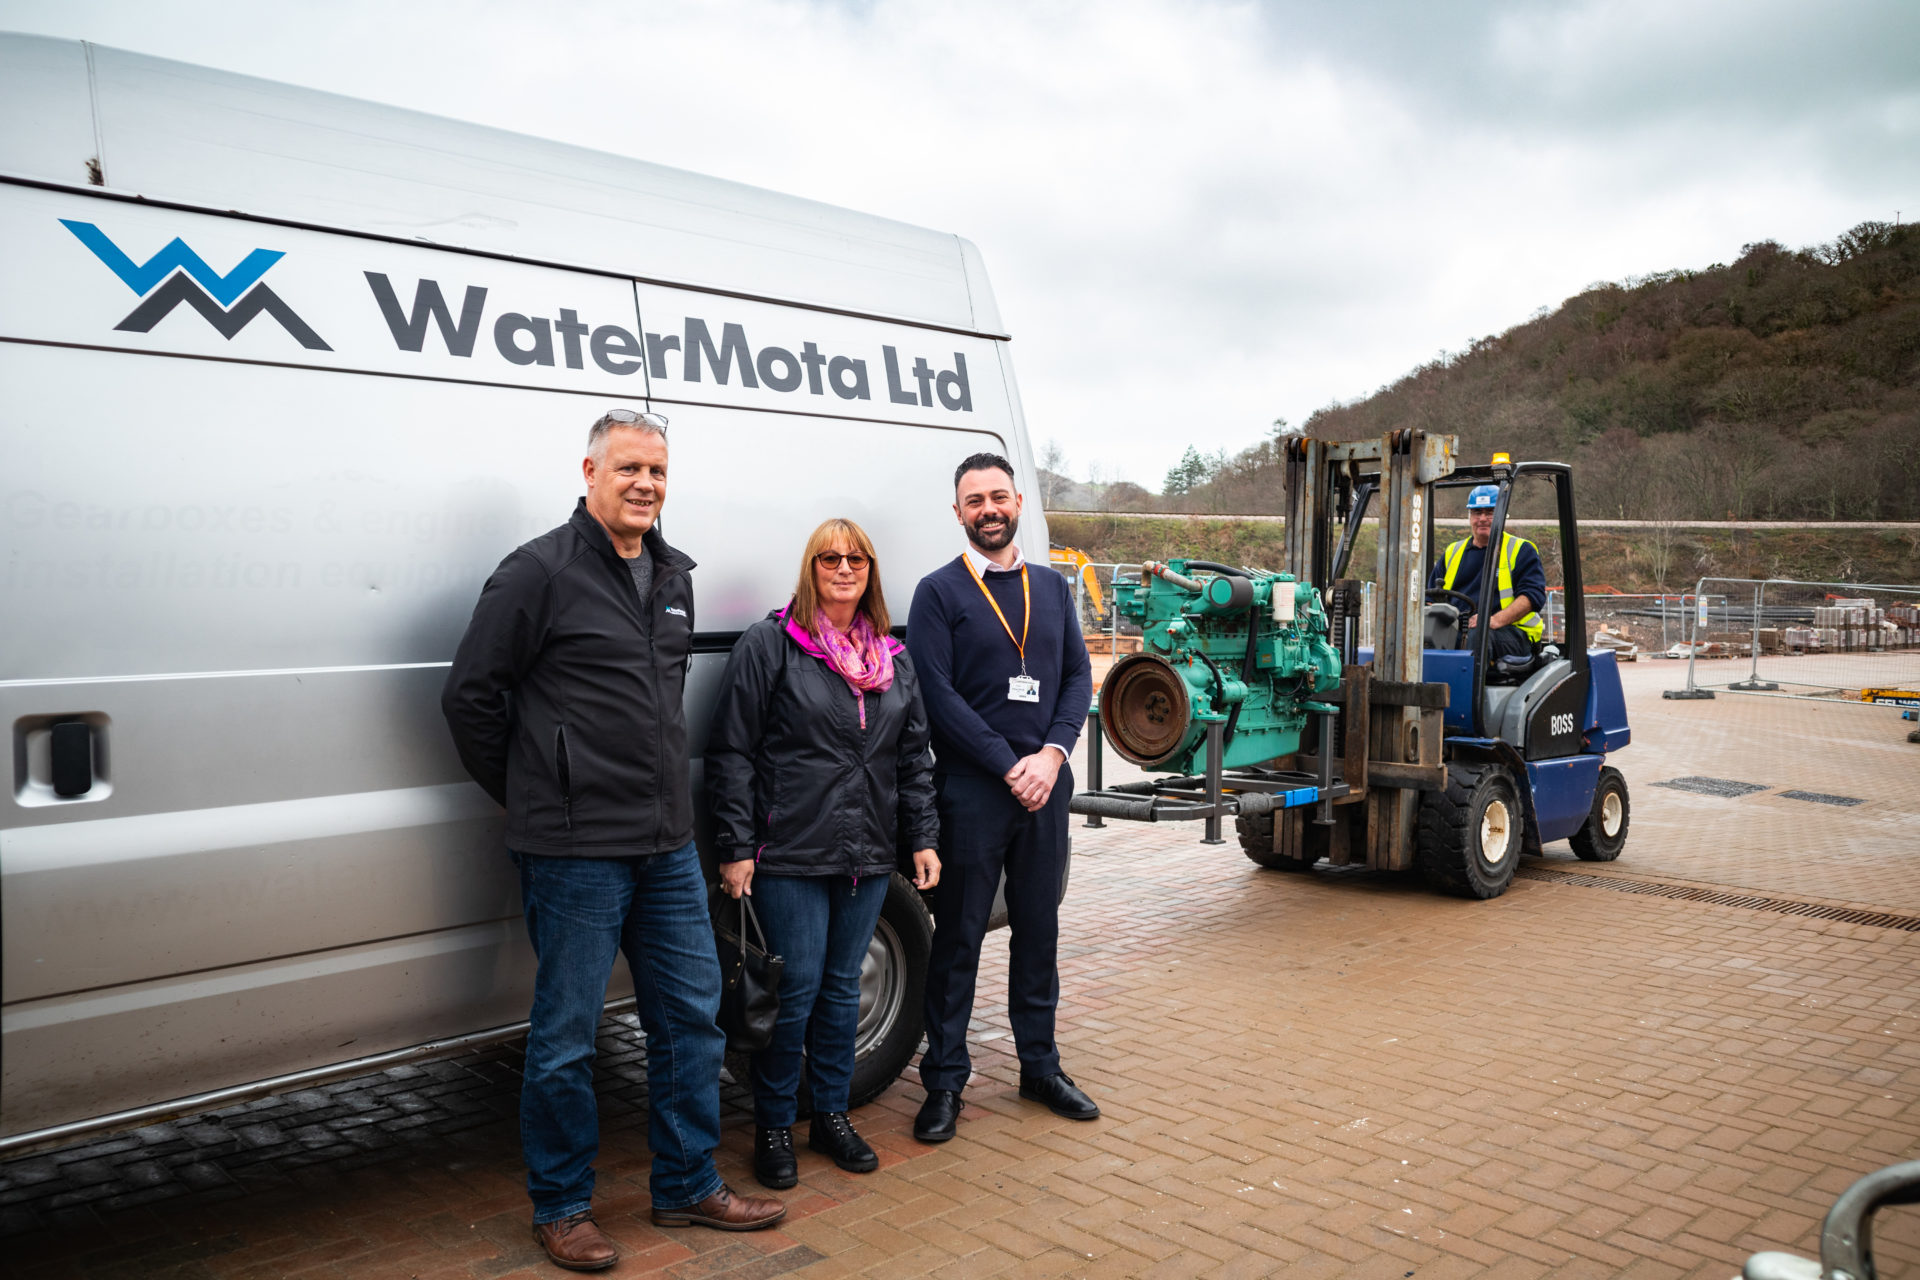 WaterMota Ltd Marketing Director David Merrick, Managing Director Alison Merrick, and Head of Technology at South Devon College Adrian Bevin overseeing the delivery.